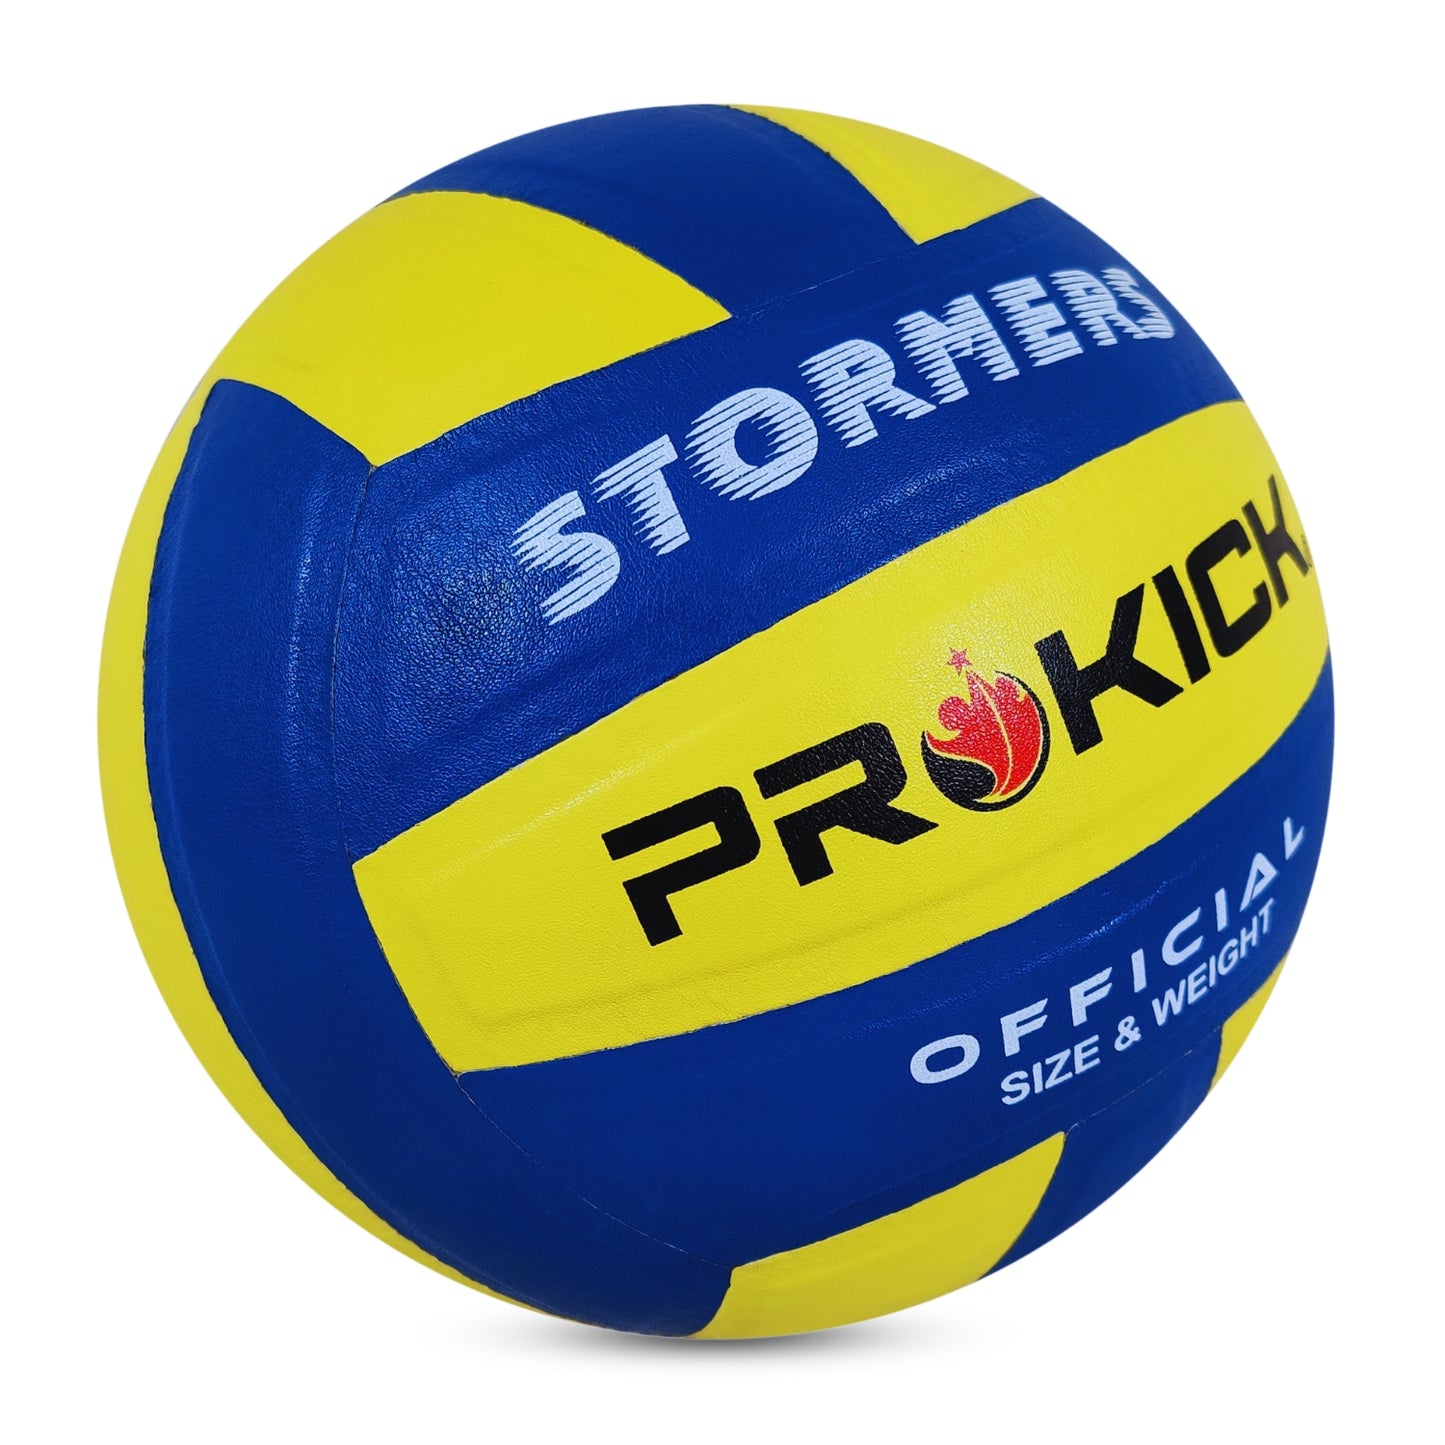 Prokick Stormers PU Pasted 18 Panels Volleyball, Blue/Yellow (Size 4) - Best Price online Prokicksports.com